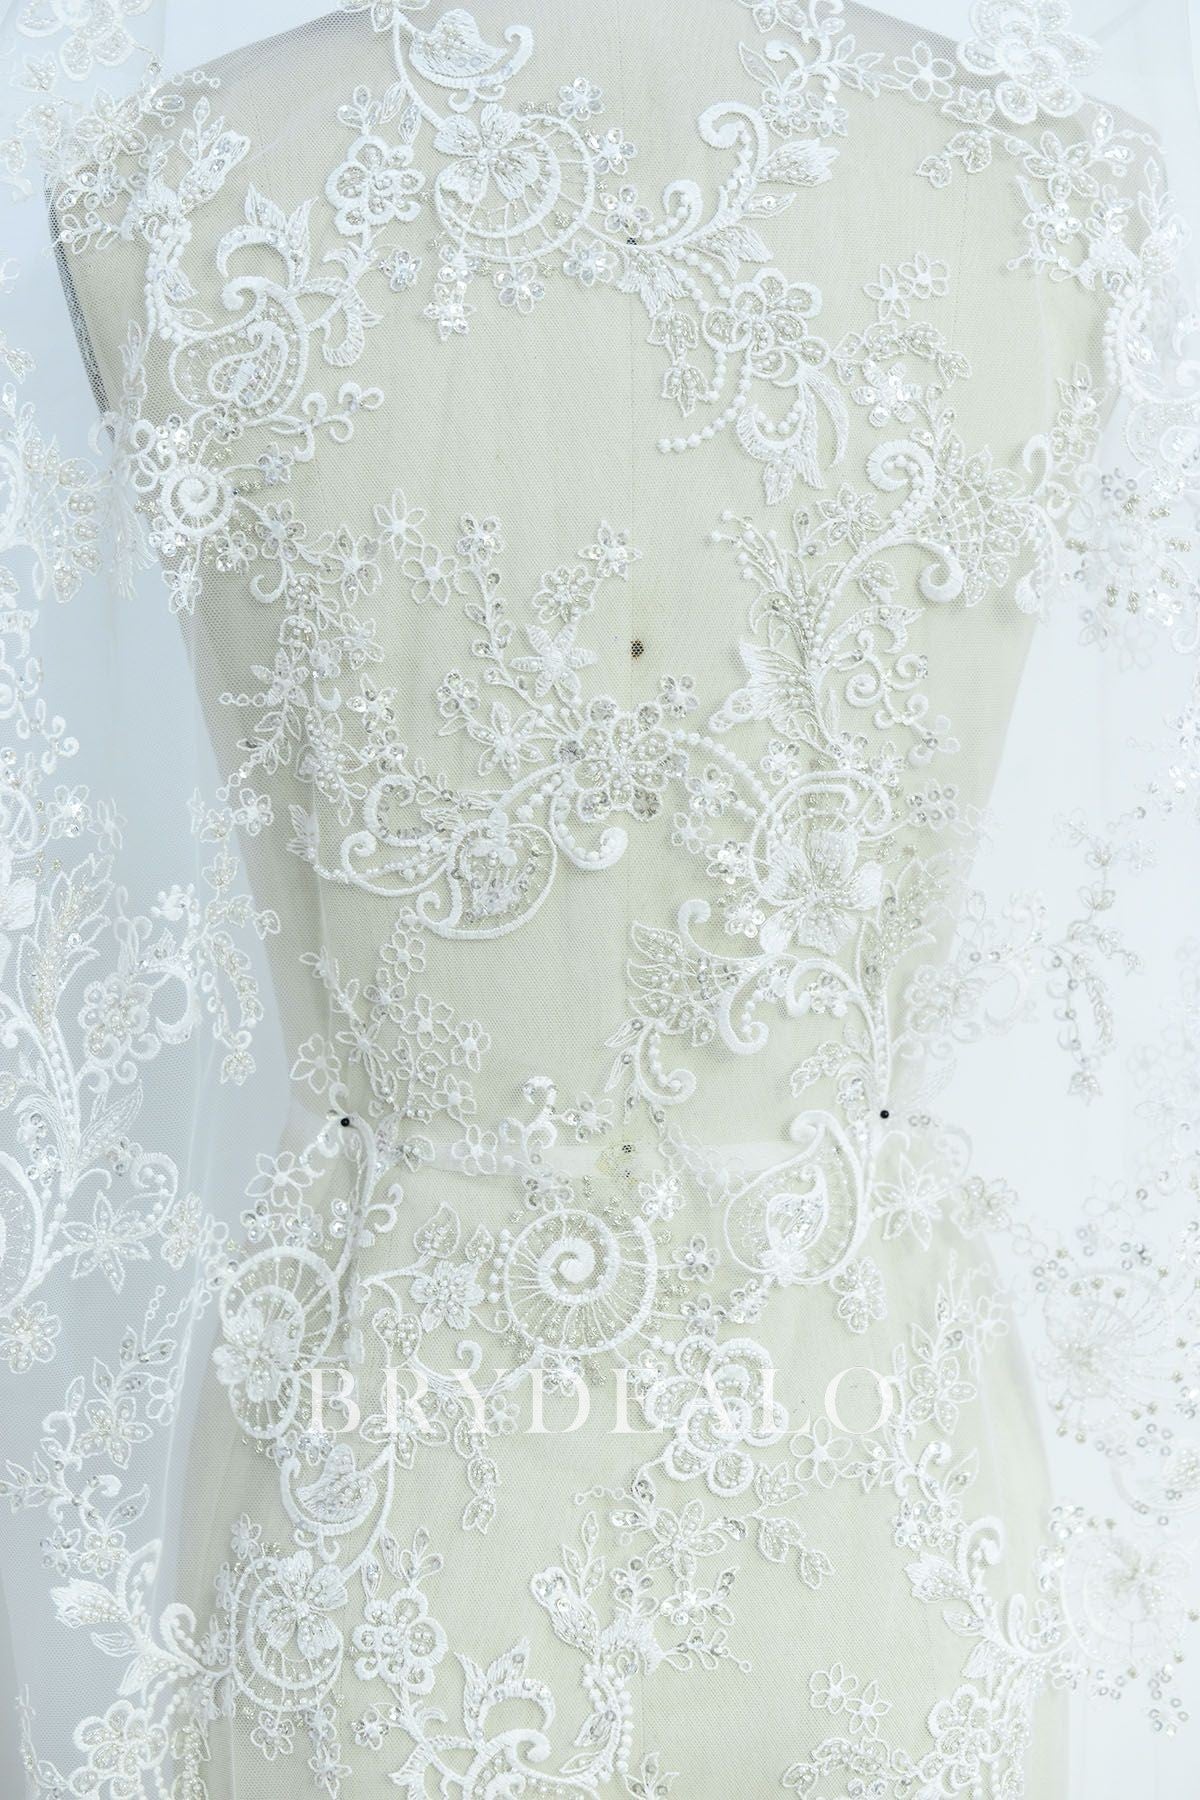  Unrestrained Embroidered Lace Fabric